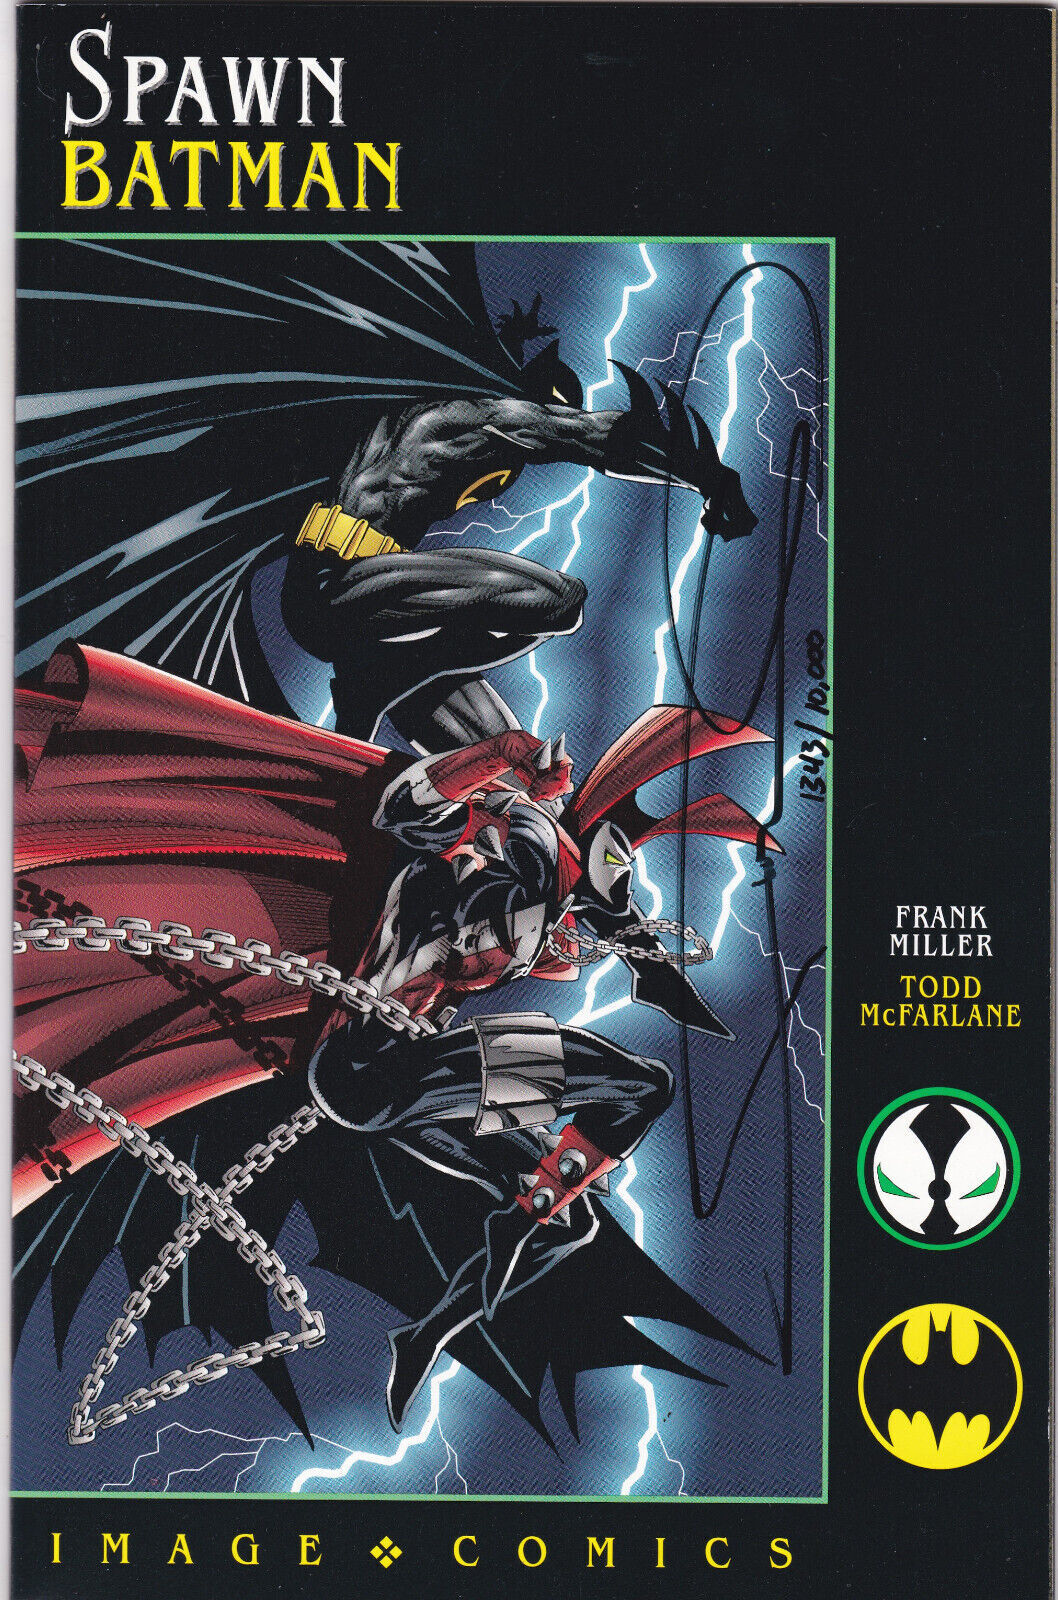 SPAWN BATMAN (1994) Todd McFarlane SIGNED by Frank Miller + COA 1343 of 10000 NM